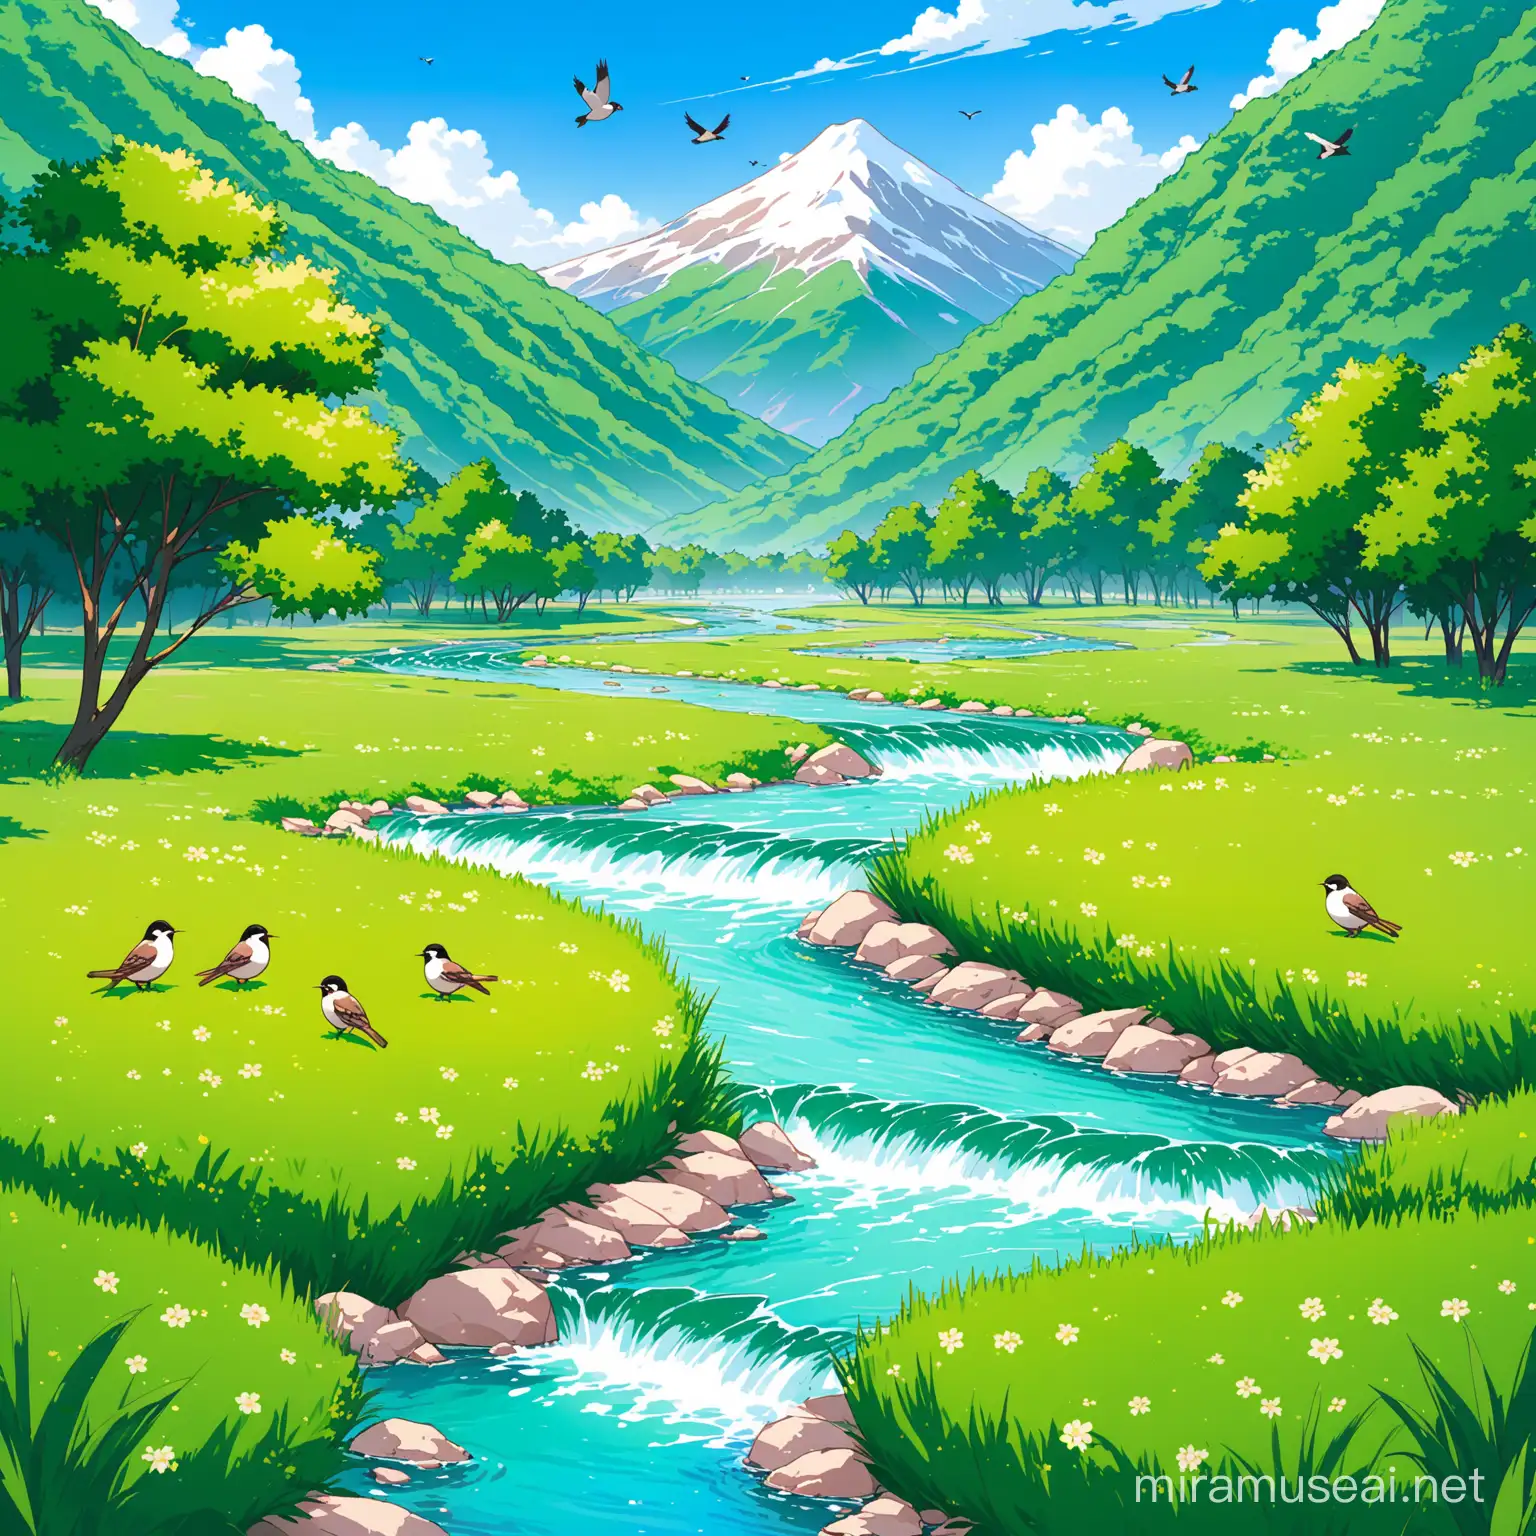 Tranquil Mountain Stream with Lush Greenery and Soaring Birds